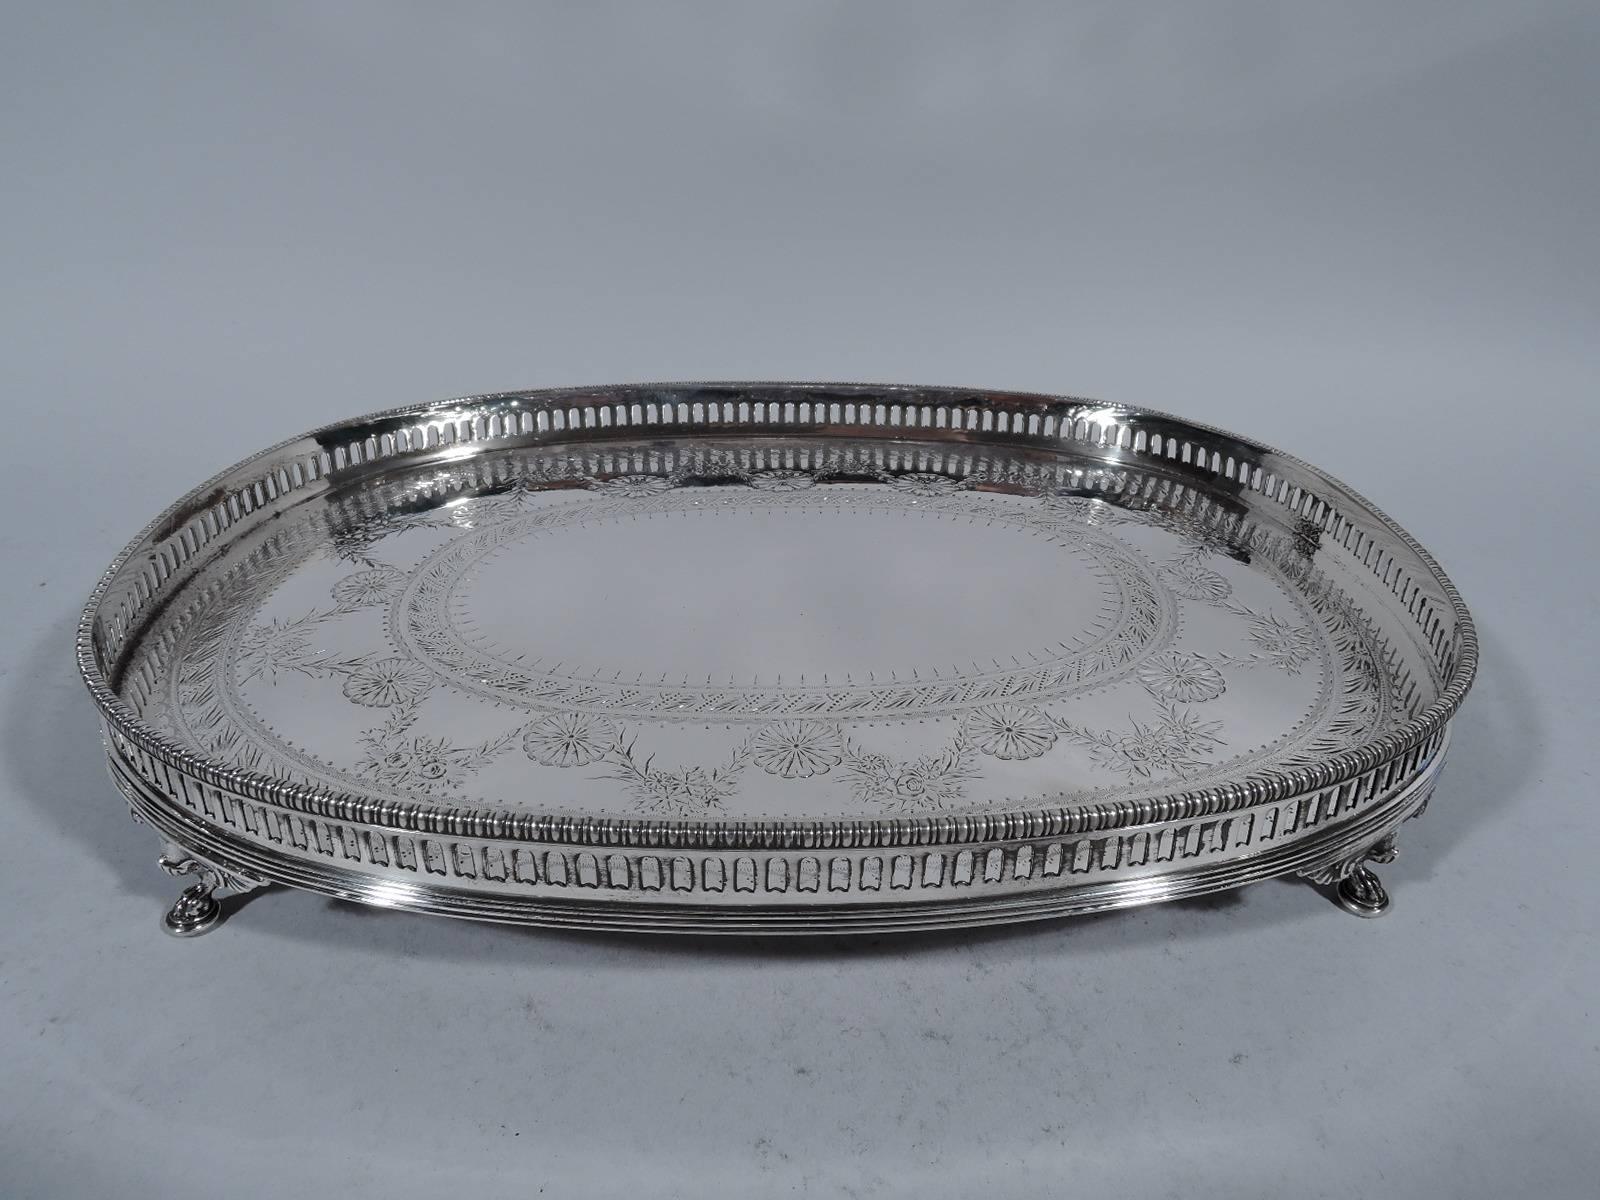 Unusual sterling silver salver. Made by Gorham in Providence in 1879. Oval well with engraved neoclassical ornament. Pierced gallery has bead-and-reel rim. Reeded base. Rests on four claw supports. Hallmark includes indistinct date letter (appears